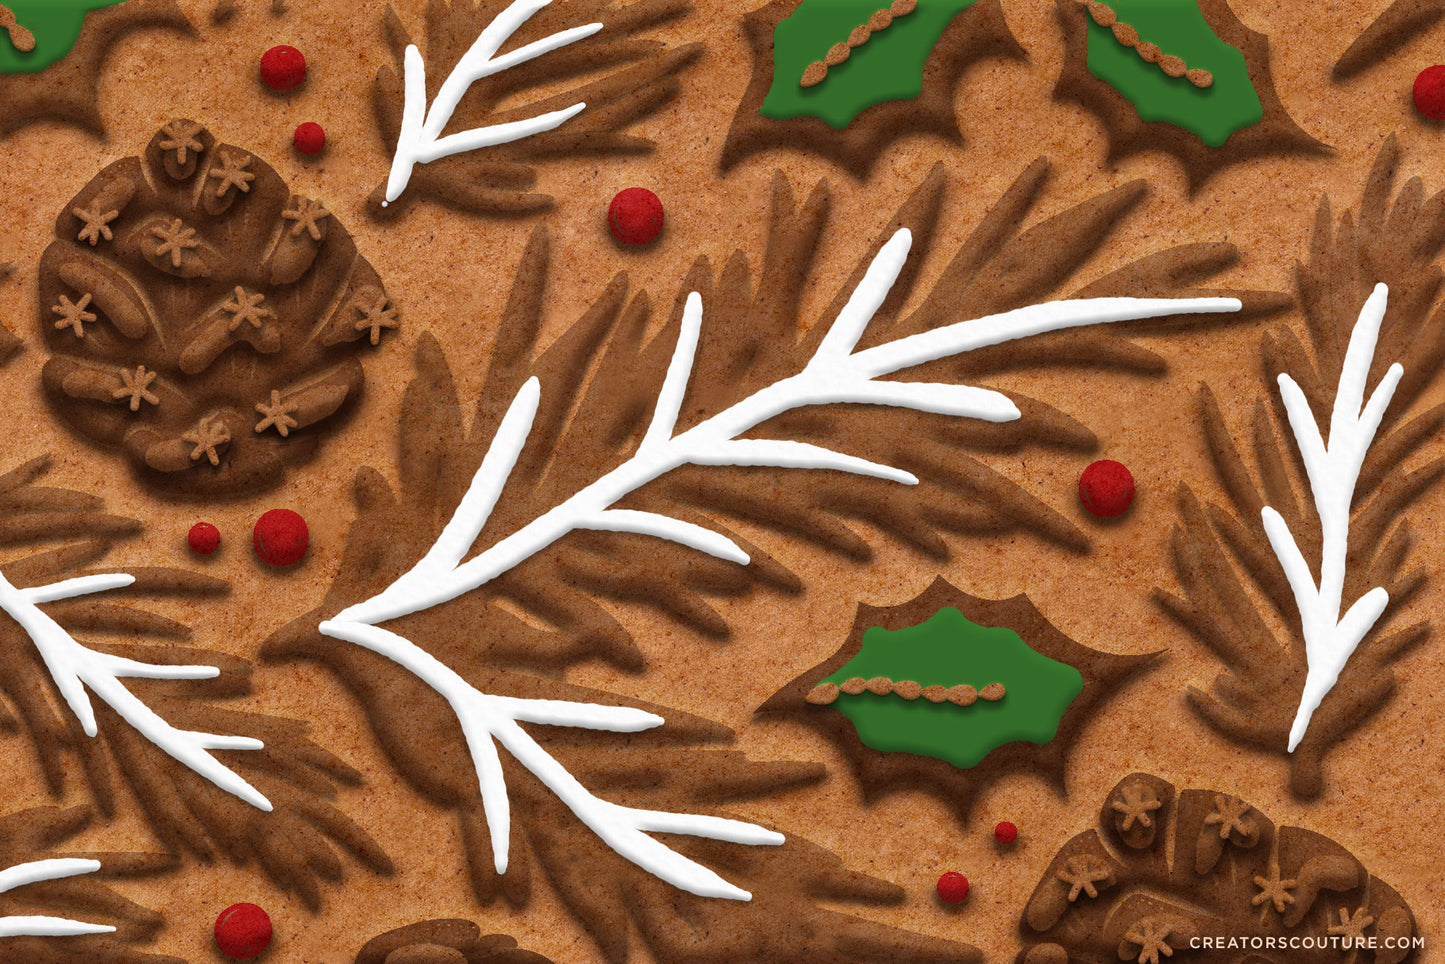 Gingerbread, Cookie, & Cake Graphic & Lettering Effects for Photoshop, gingerbread cake art